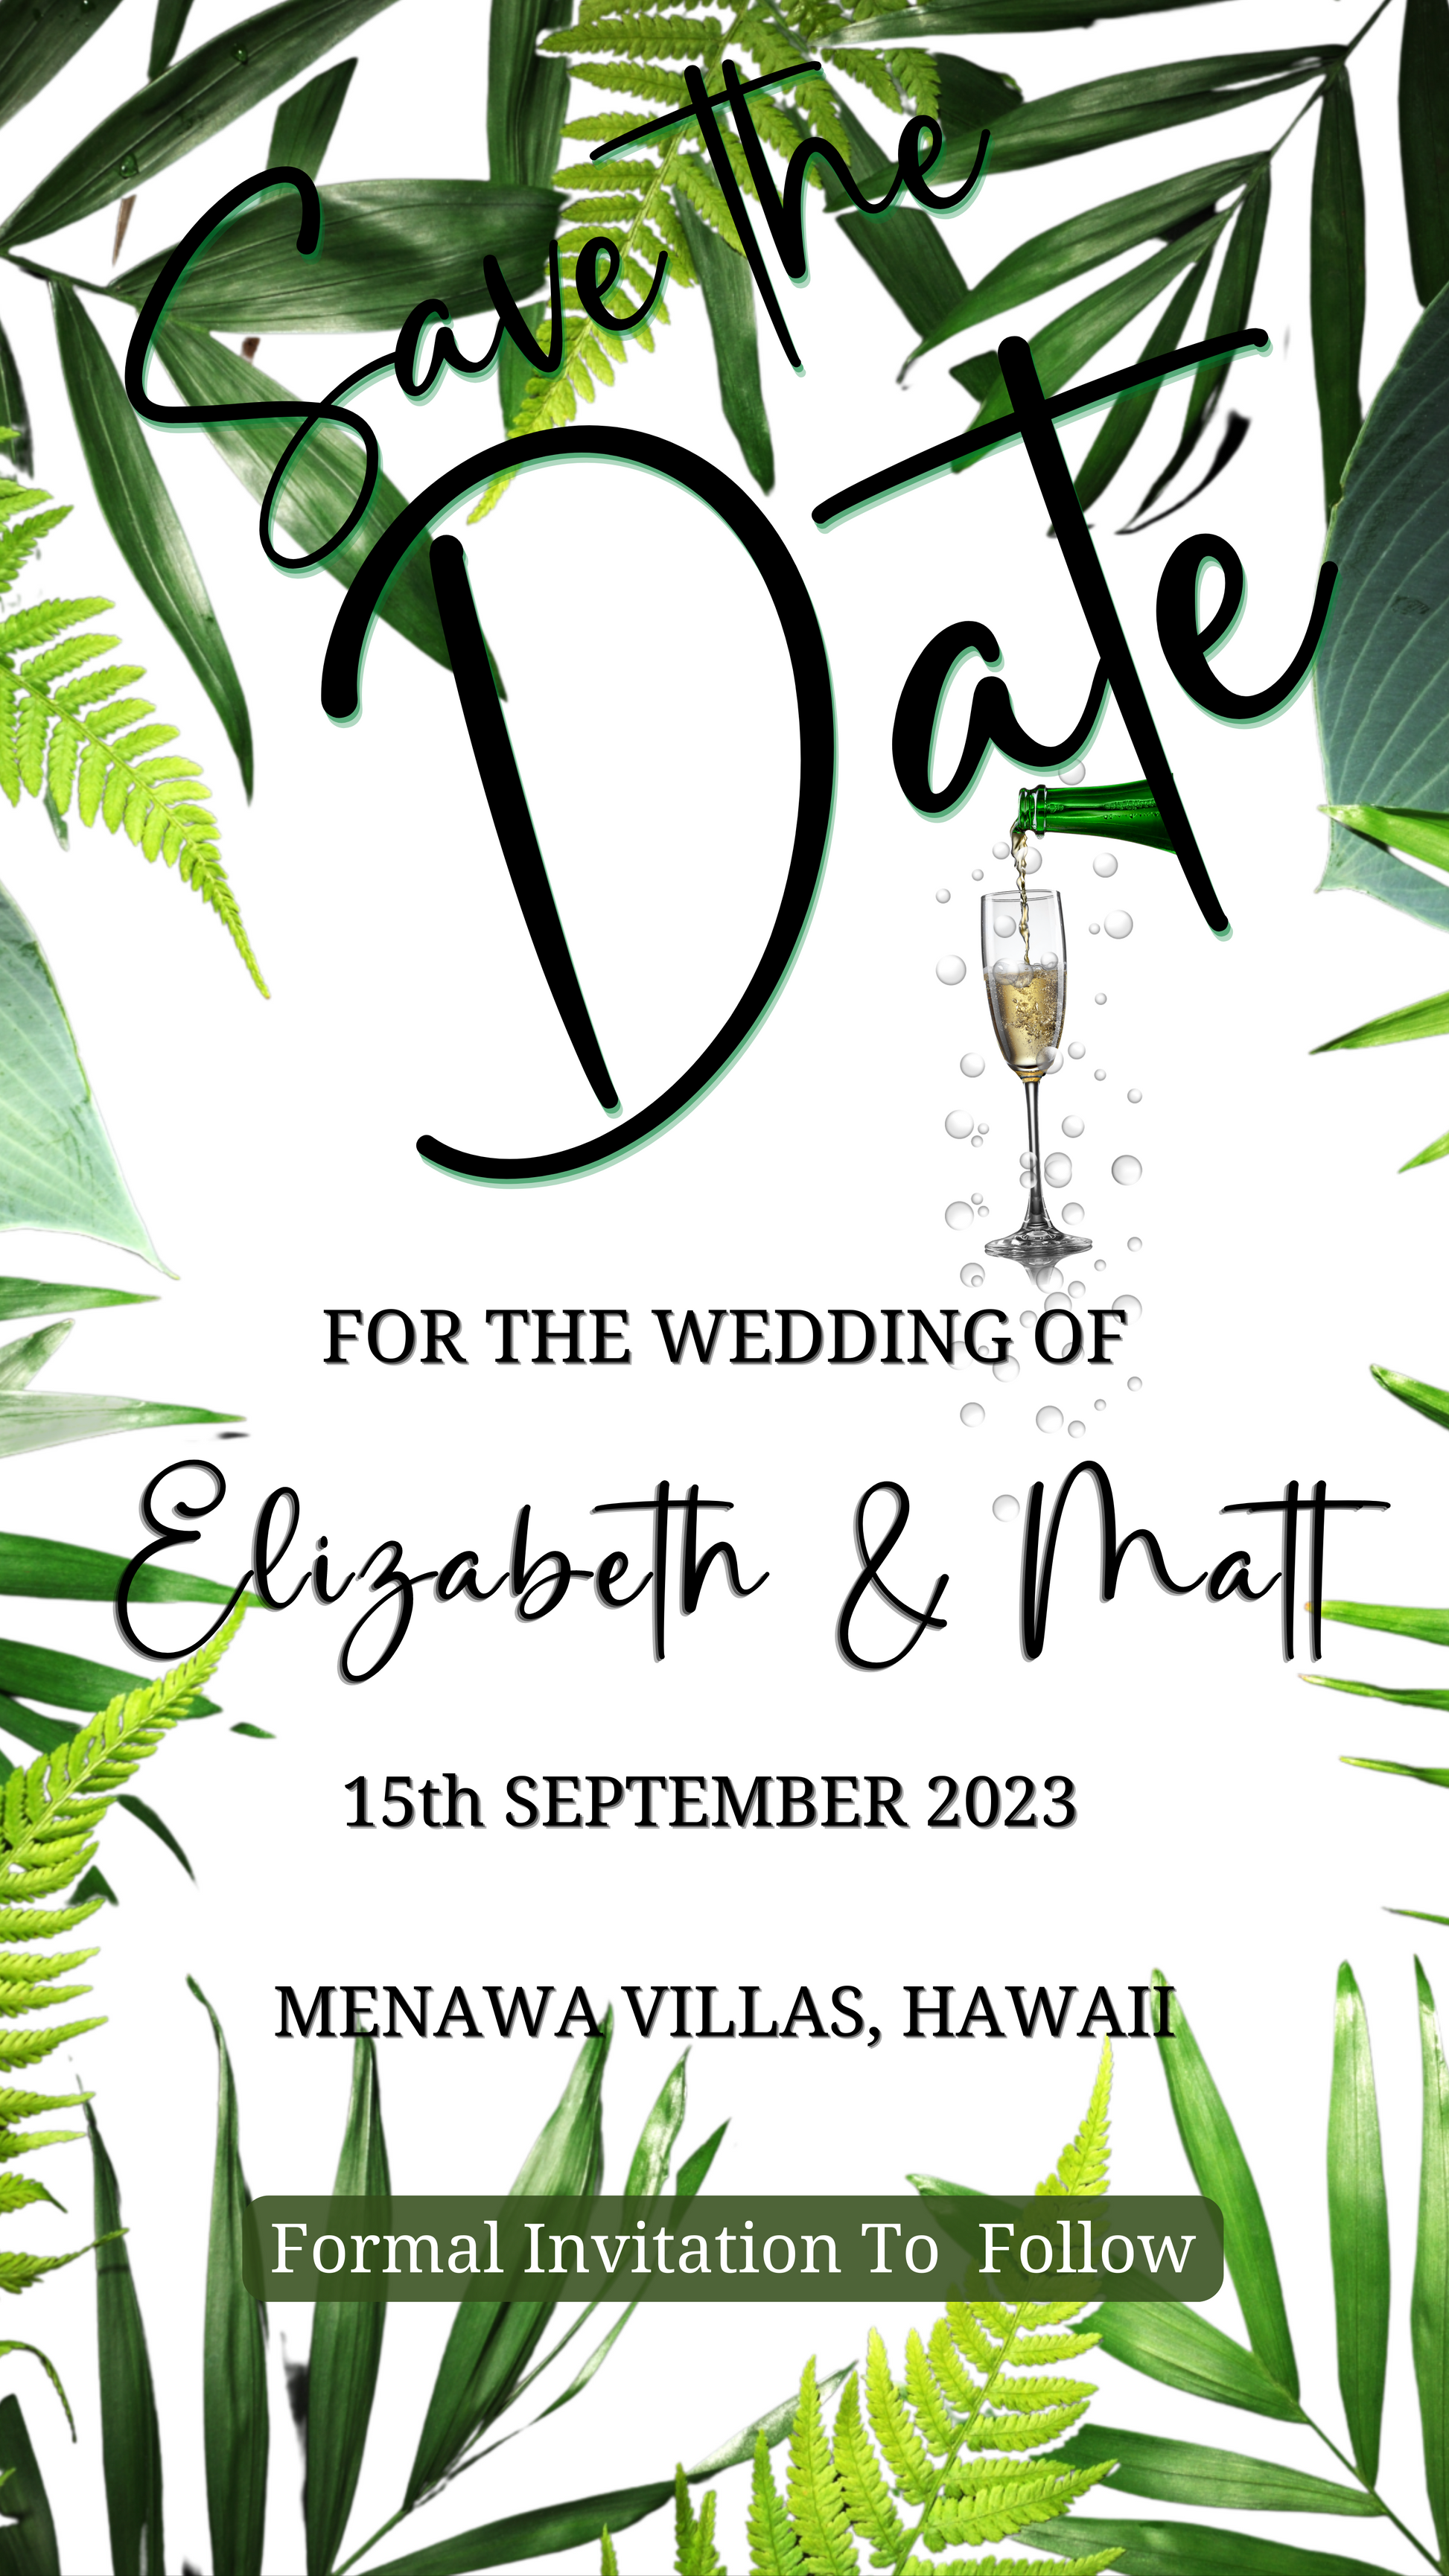 Wedding invitation White Tropical Destination | Save The Date Wedding Evite with champagne glass and green leaves, ready for digital customization.